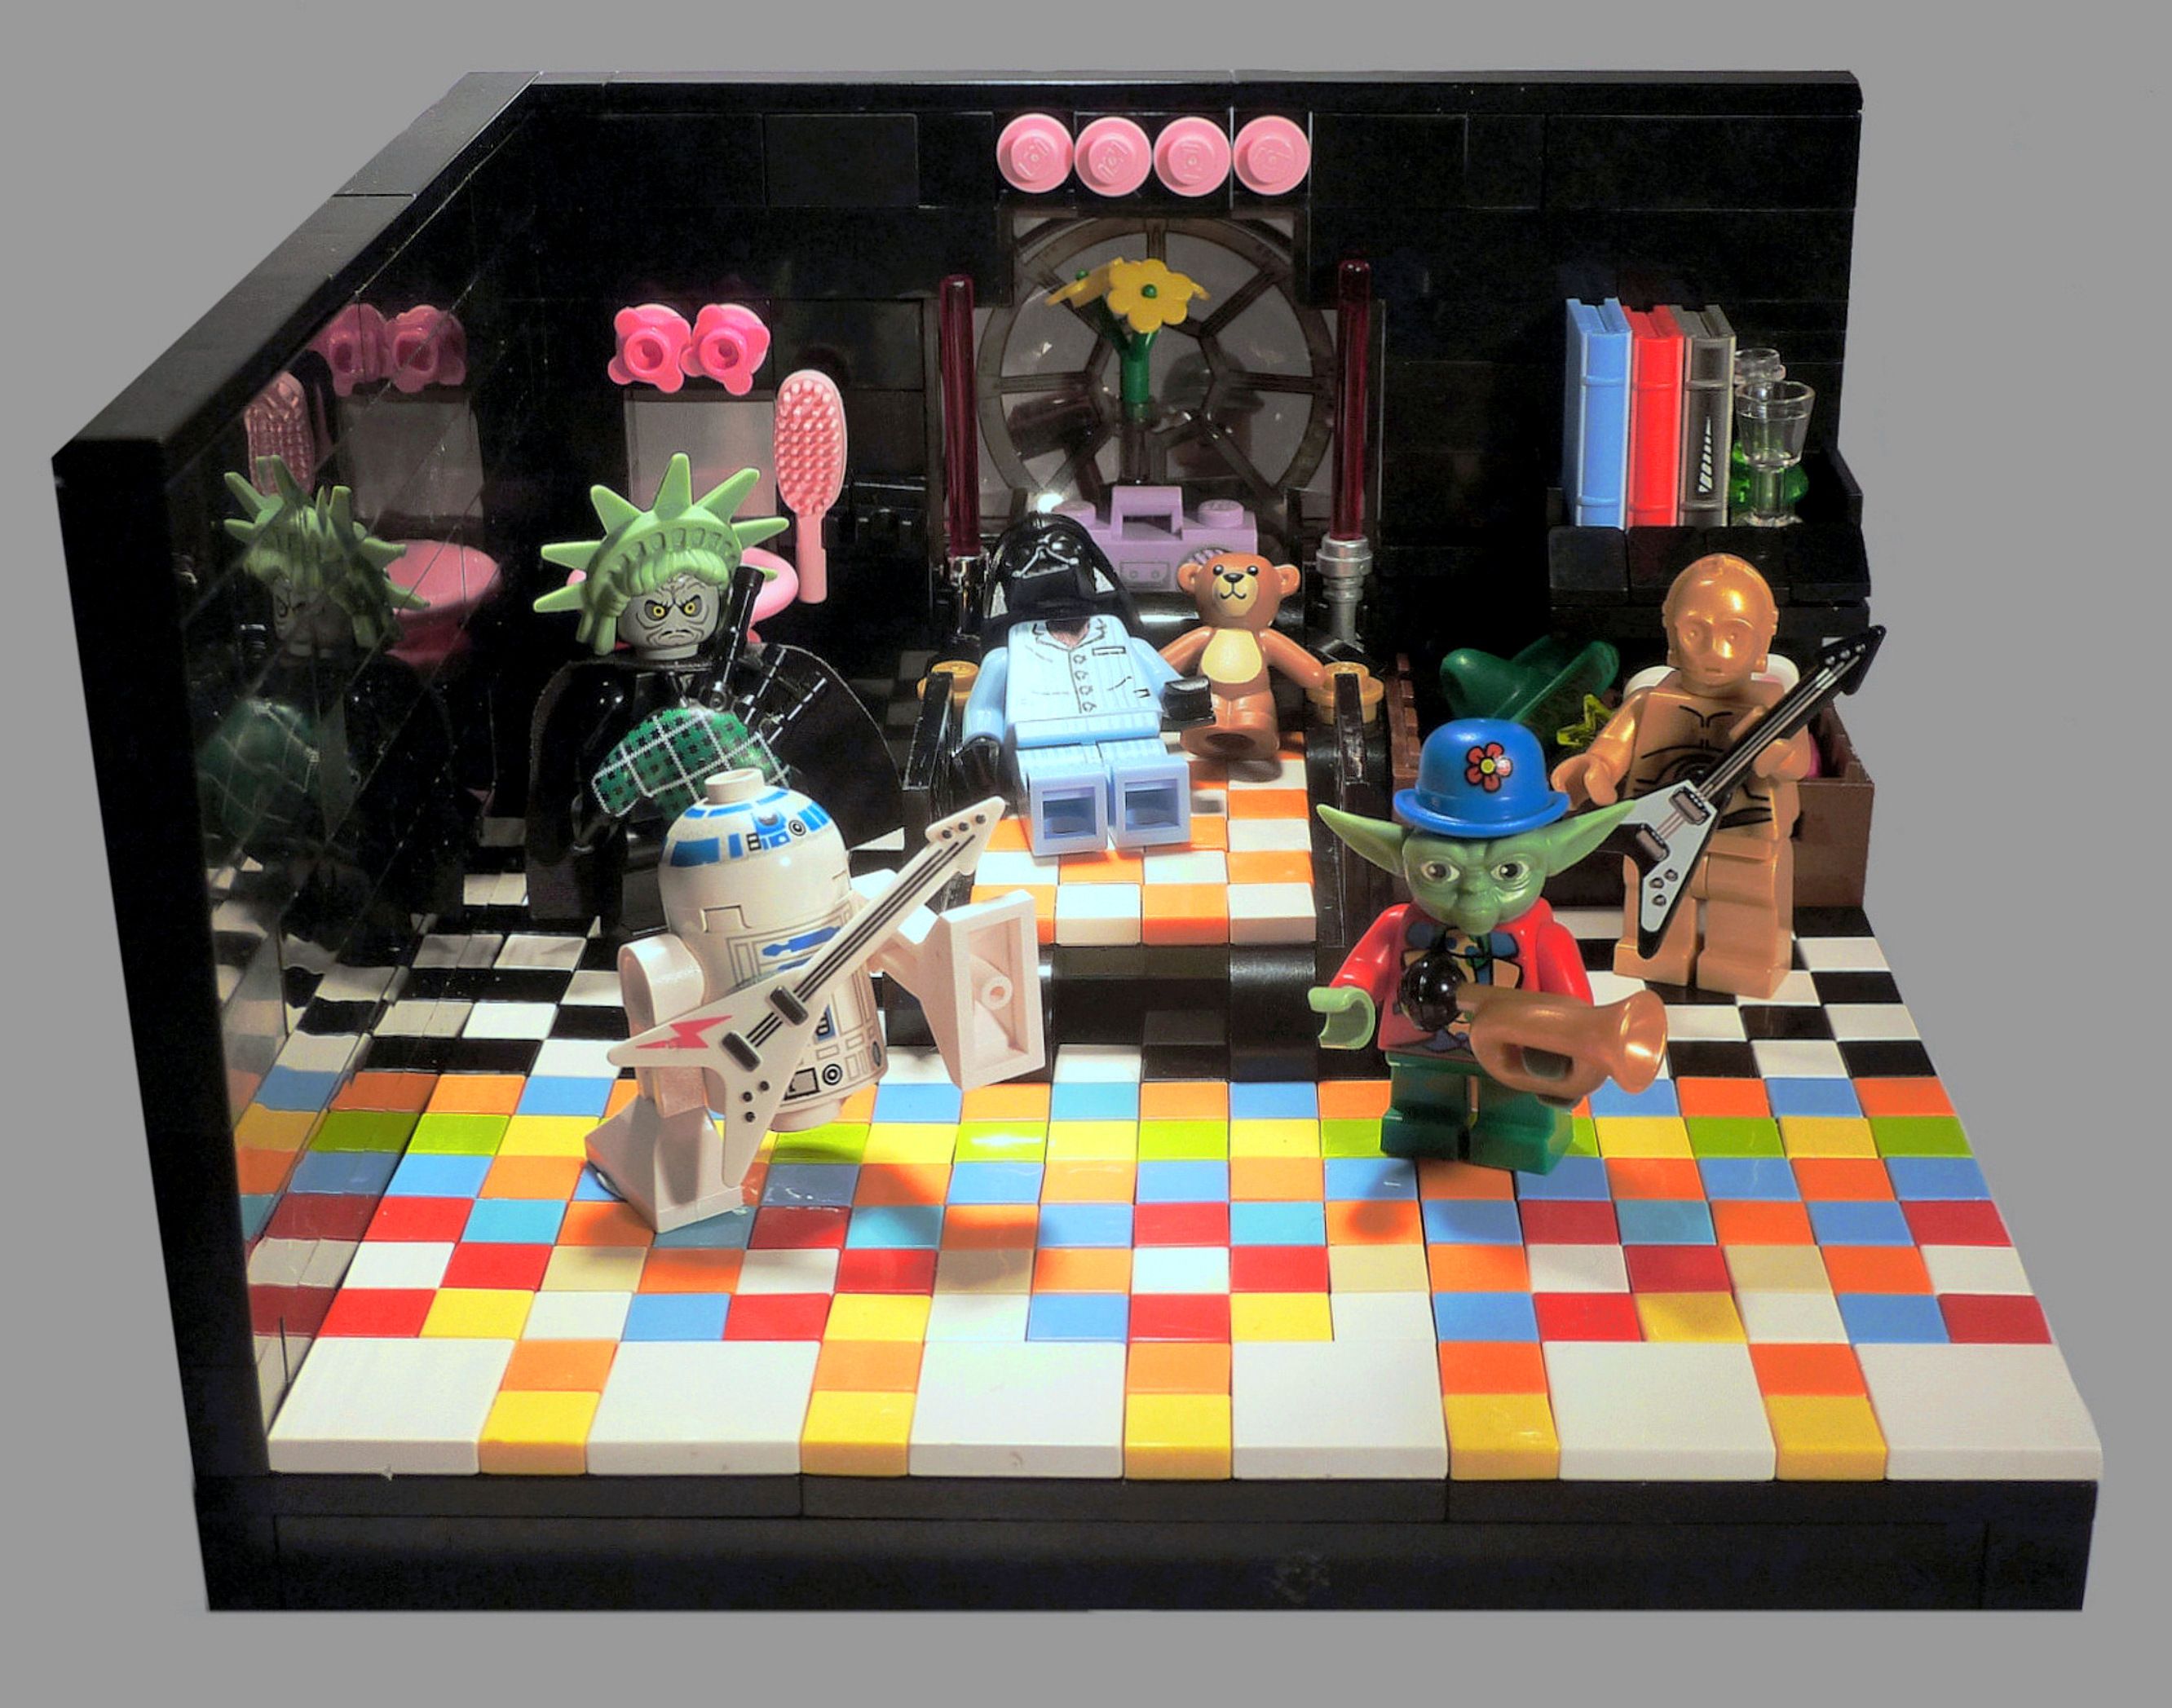 inaugural golden brickies celebrates star wars lego in perfect fan style image 3